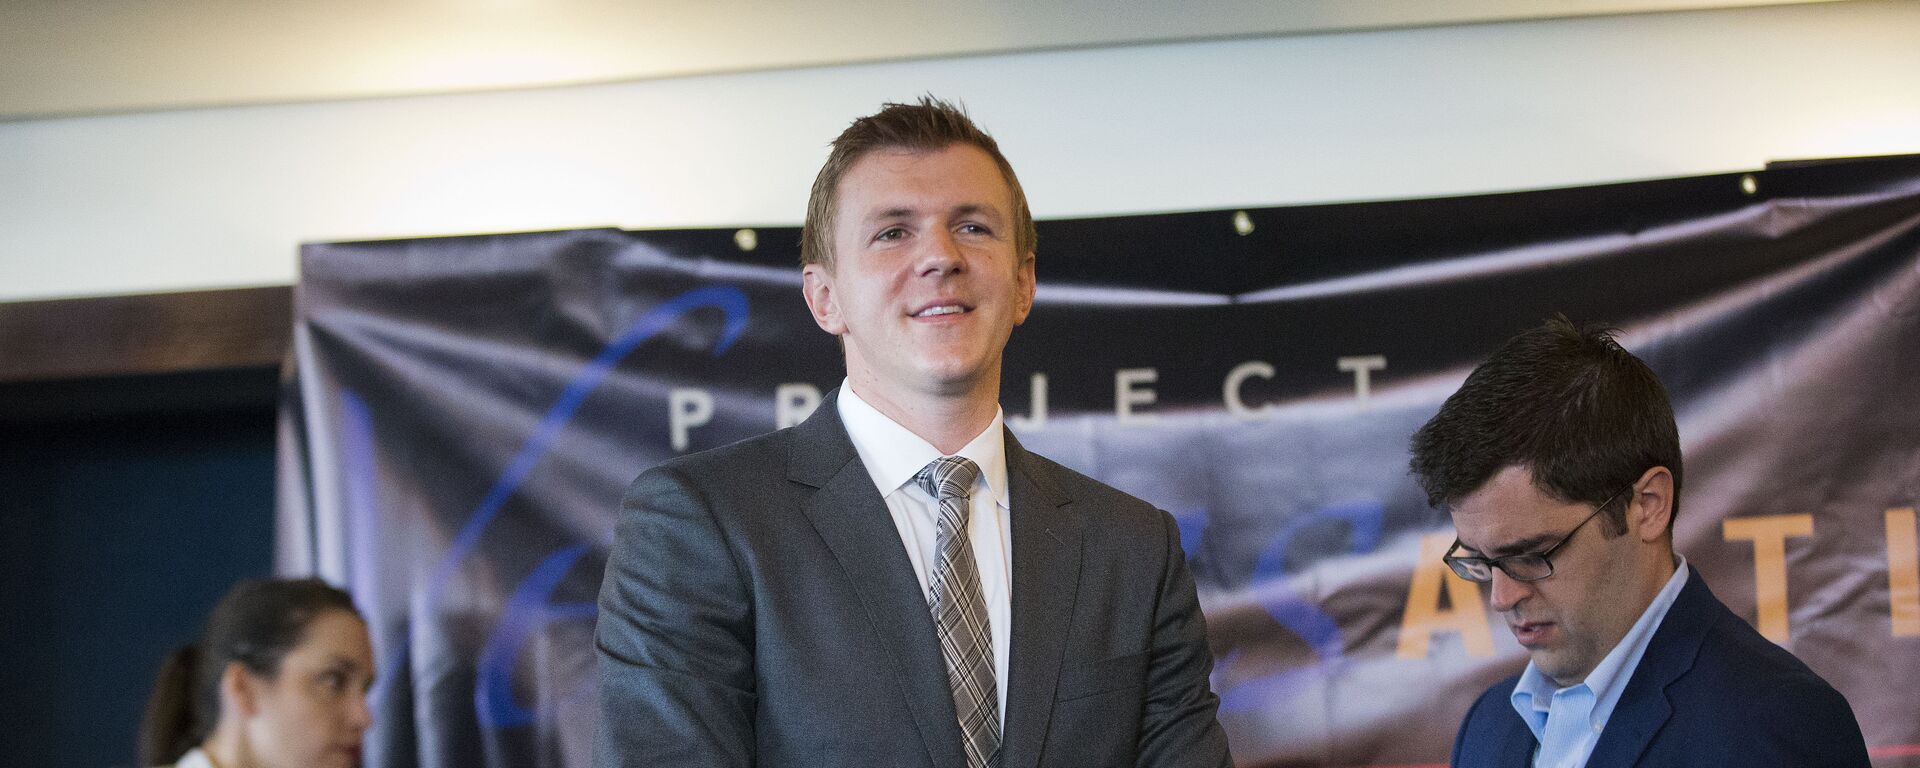 James O'Keefe, President of Project Veritas Action, waits to be introduced during a news conference at the National Press Club in Washington. (File) - Sputnik International, 1920, 07.11.2021